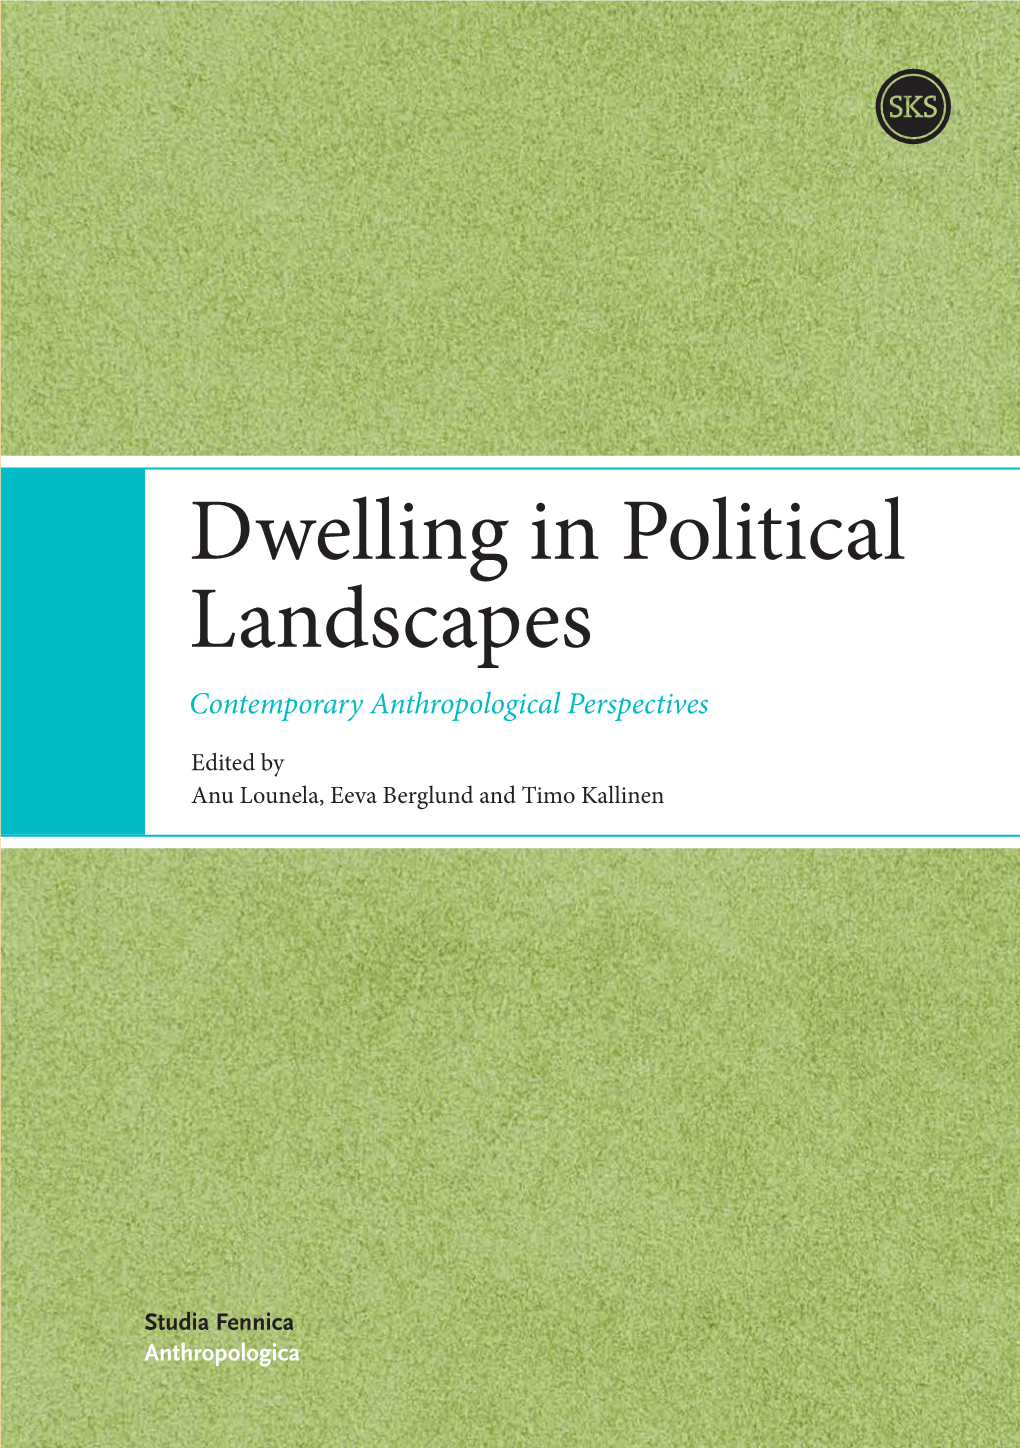 Dwelling in Political Landscapes Contemporary Anthropological Perspectives